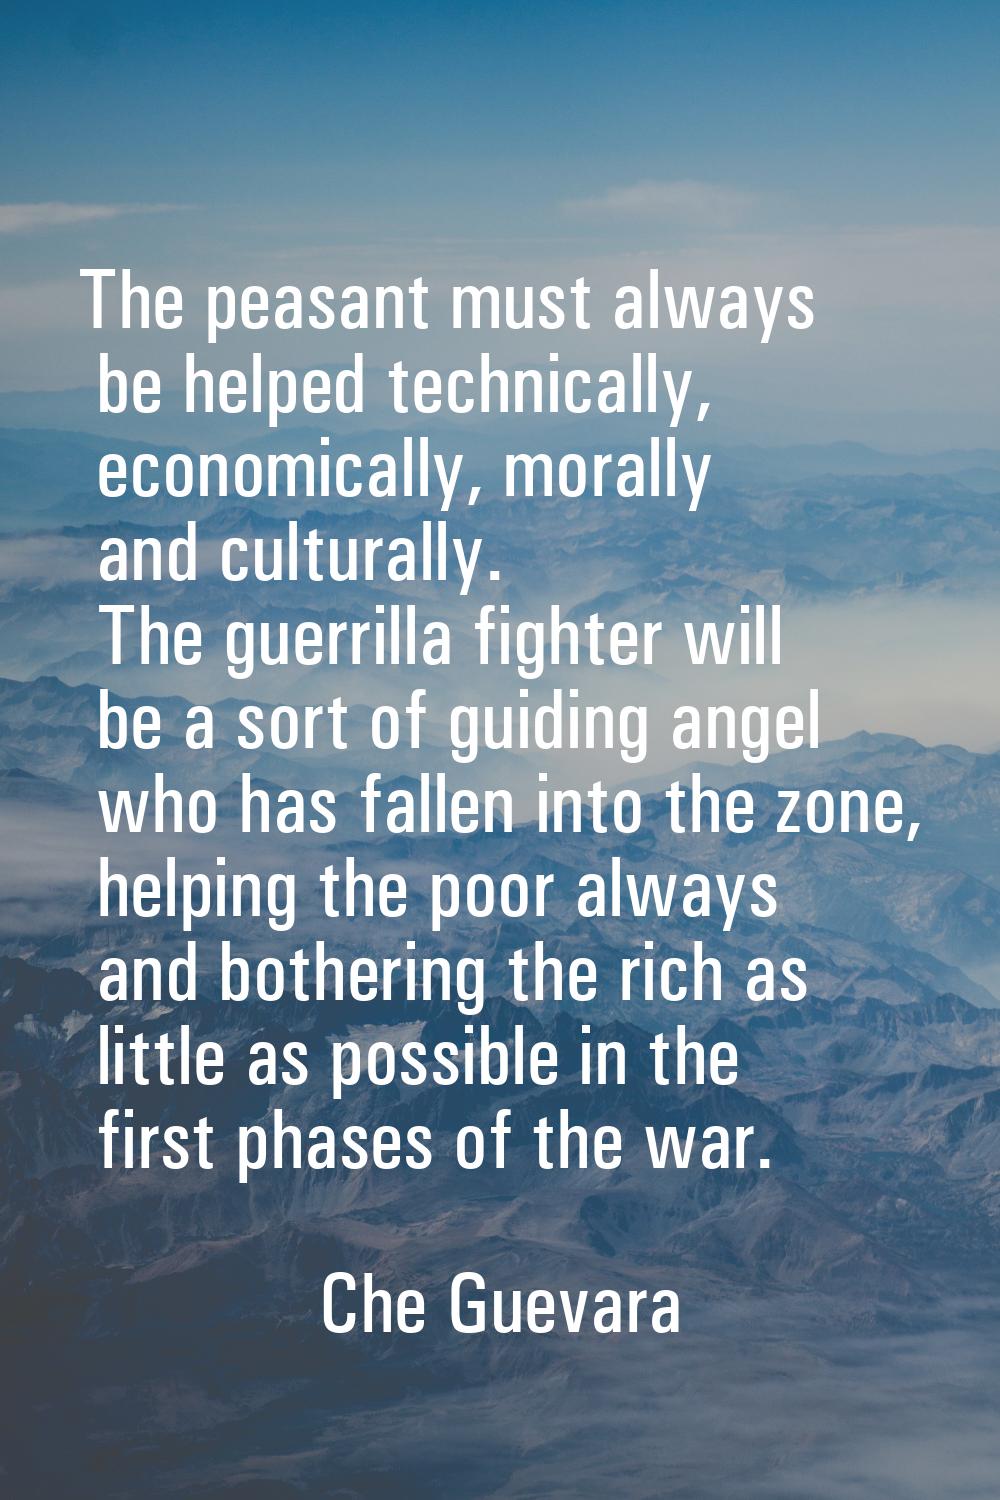 The peasant must always be helped technically, economically, morally and culturally. The guerrilla 